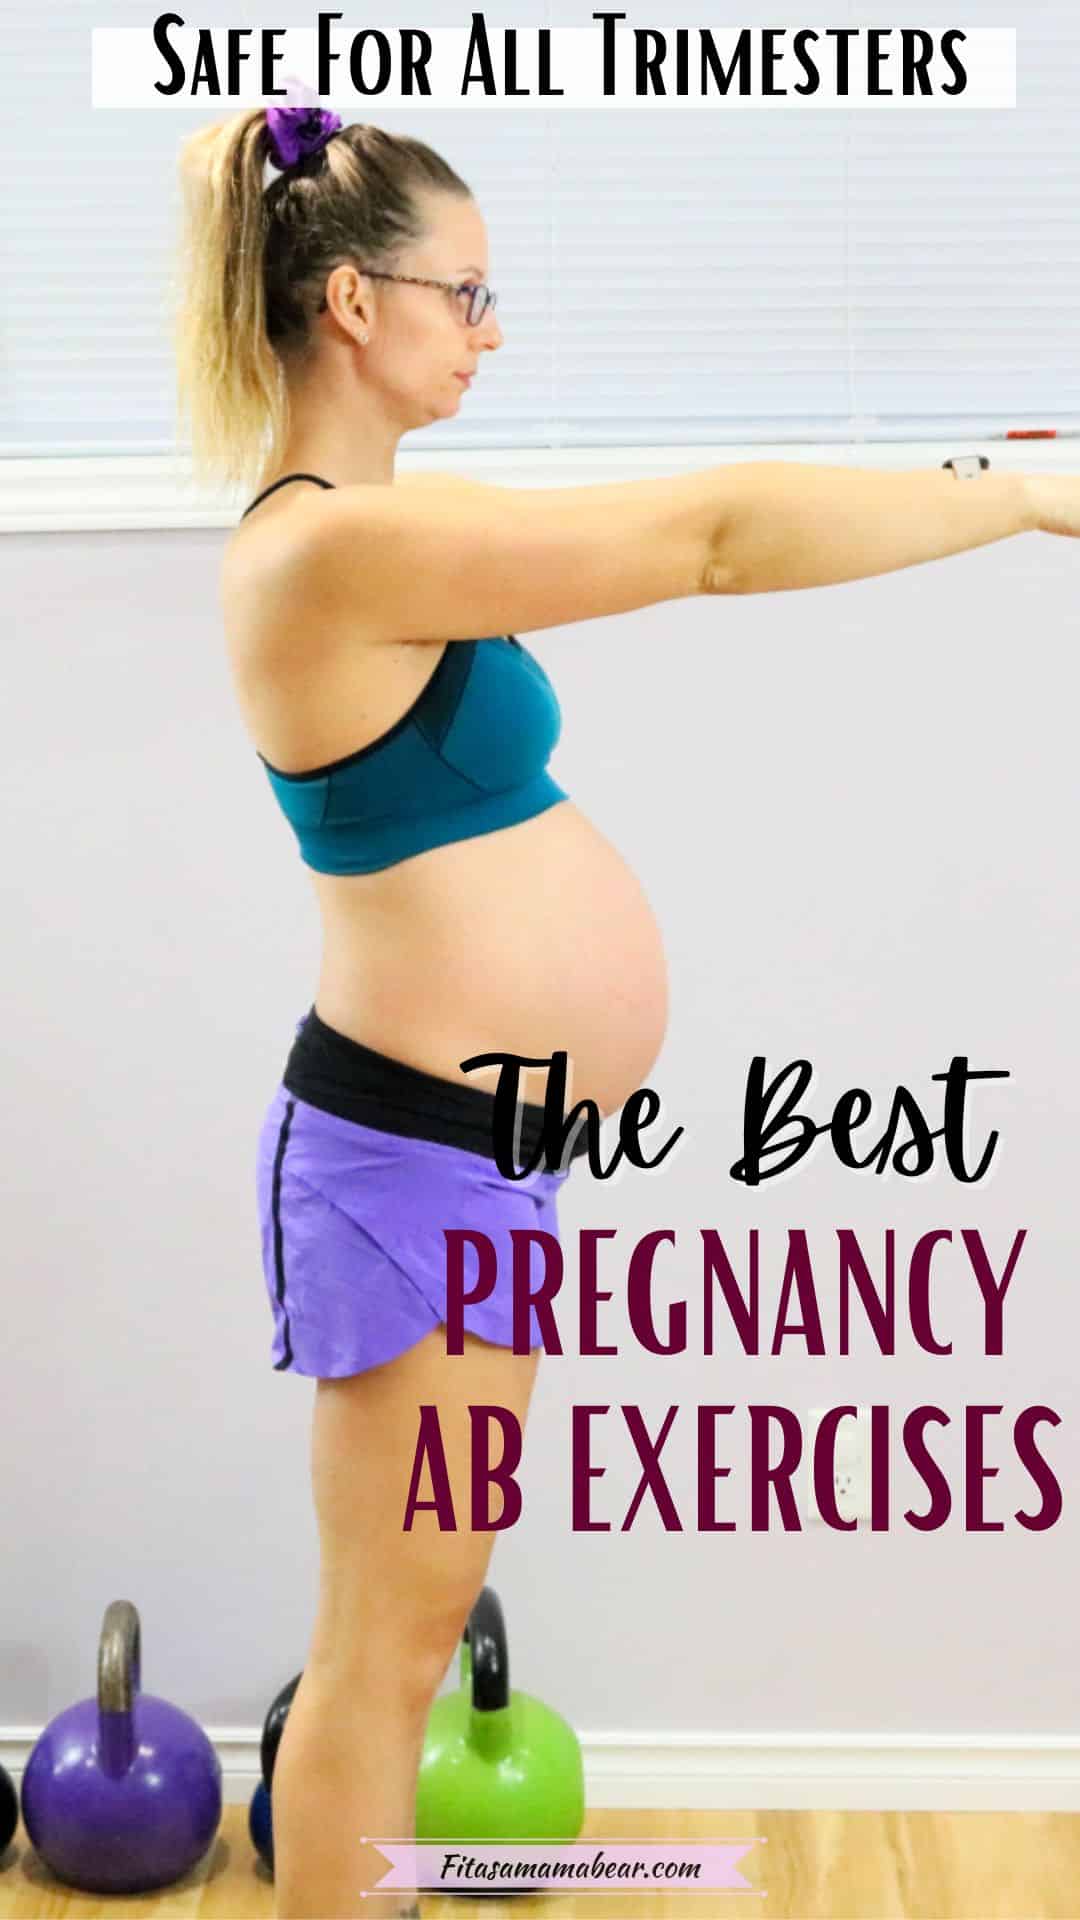 15 Best Pregnancy Hacks for Every Trimester